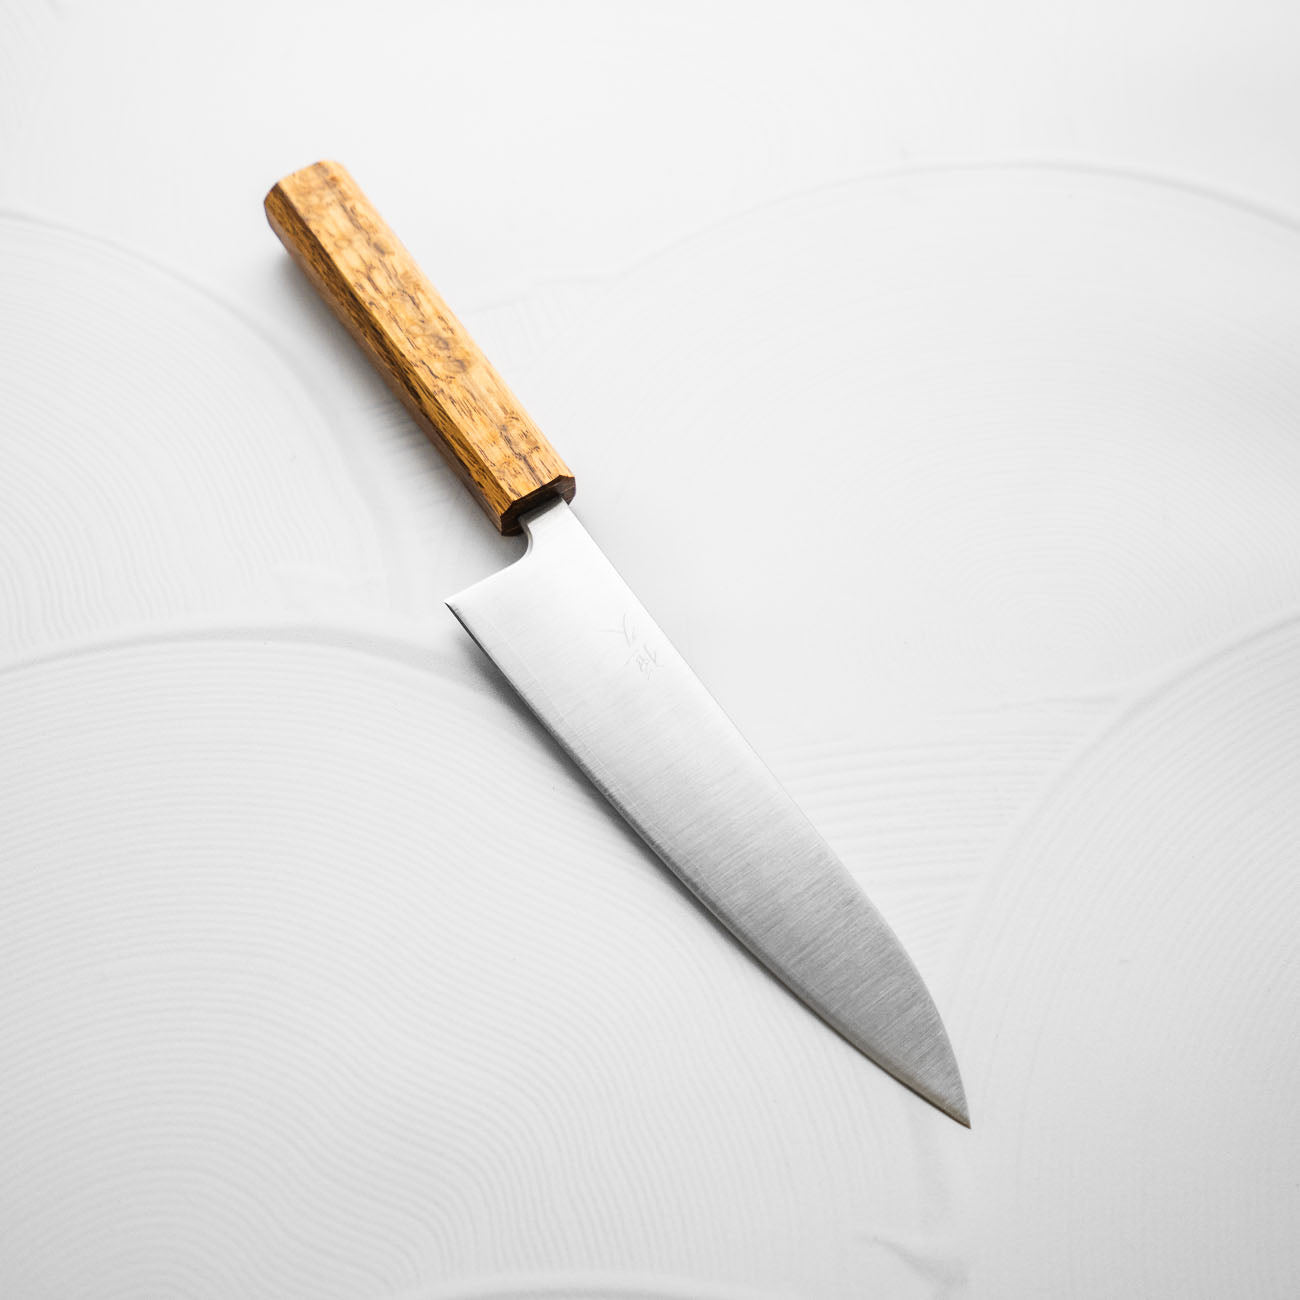 Discover Melbourne's Finest Japanese Knives at Chef's Edge